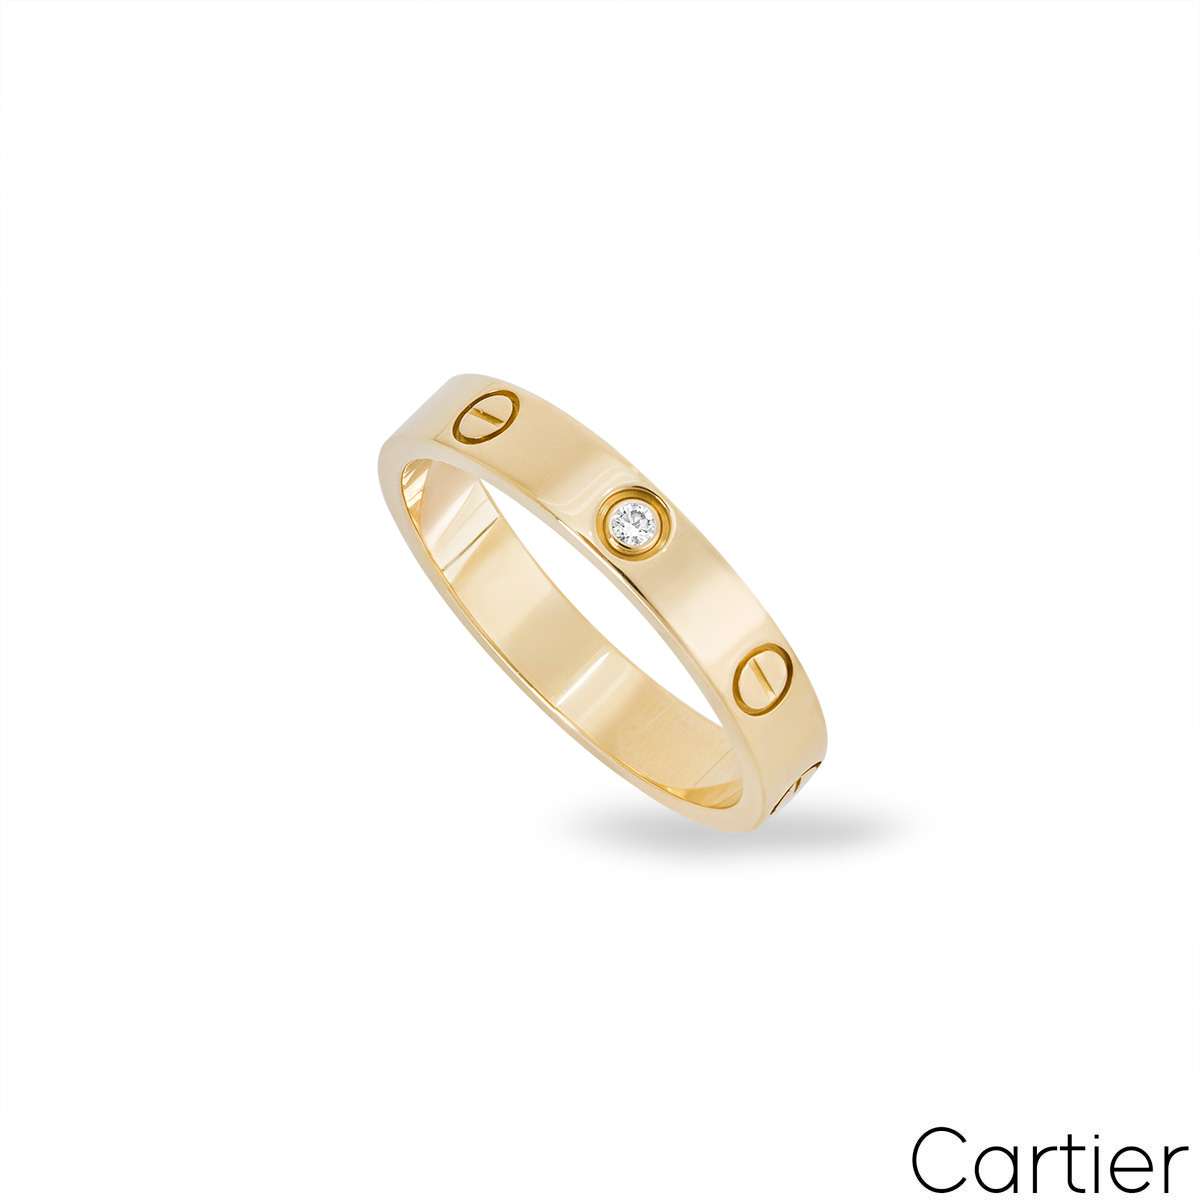 Searching for Cartier Nail ring. : r/DHgate